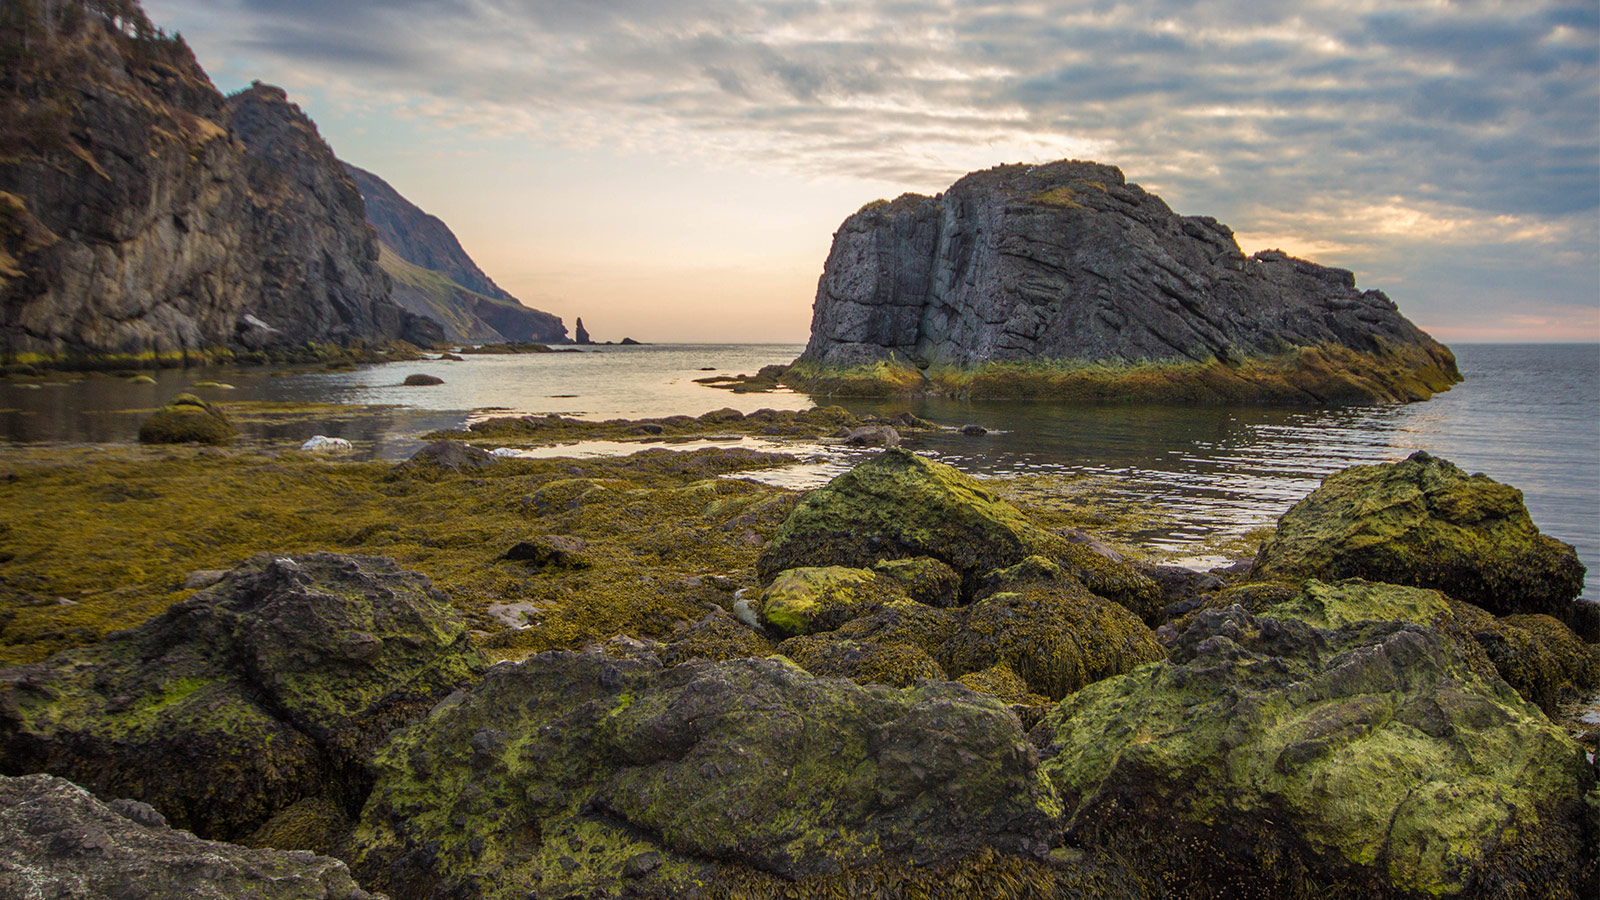 Rocks covered in green moss and tall cliffs along the coast of Gros Morne National Park in Newfoundland